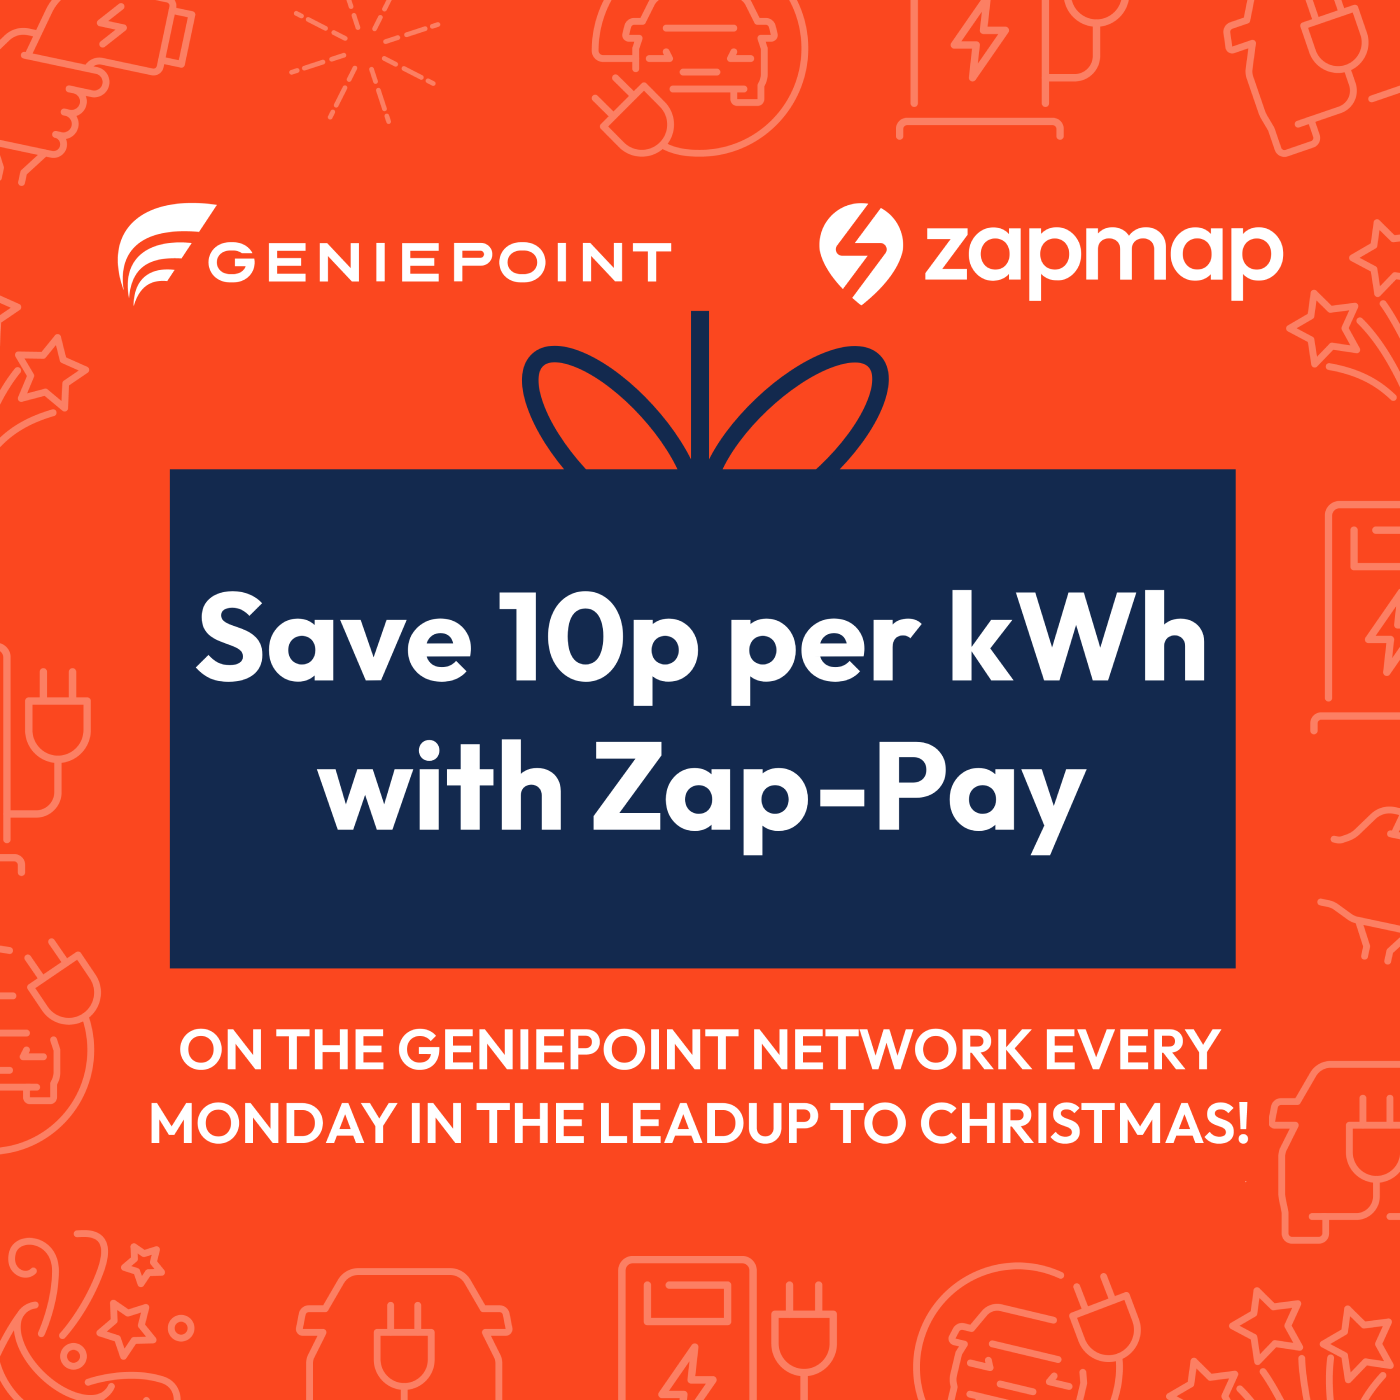 GeniePoint promotion image with details of promotion